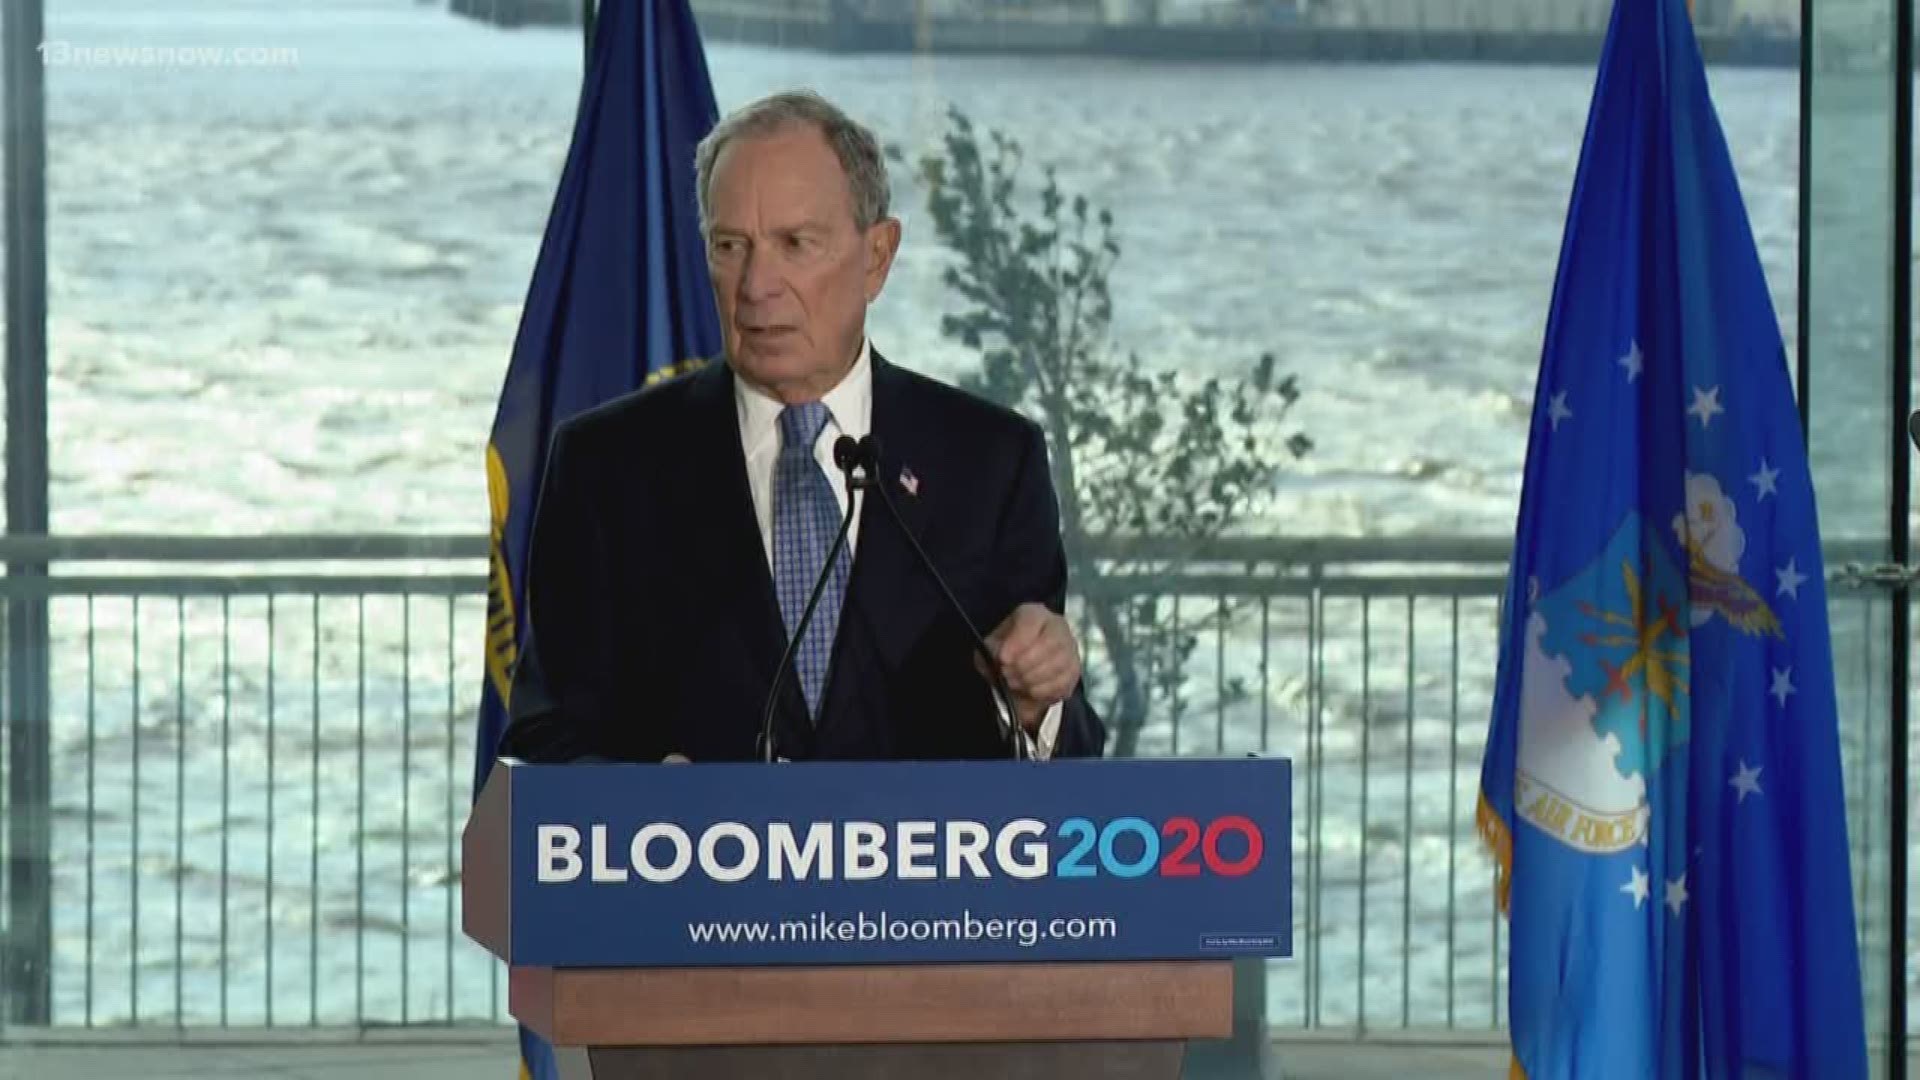 13News Now Evan Watson sat down with Mike Bloomberg about his campaign stop in Norfolk where he spoke with military families and veterans.